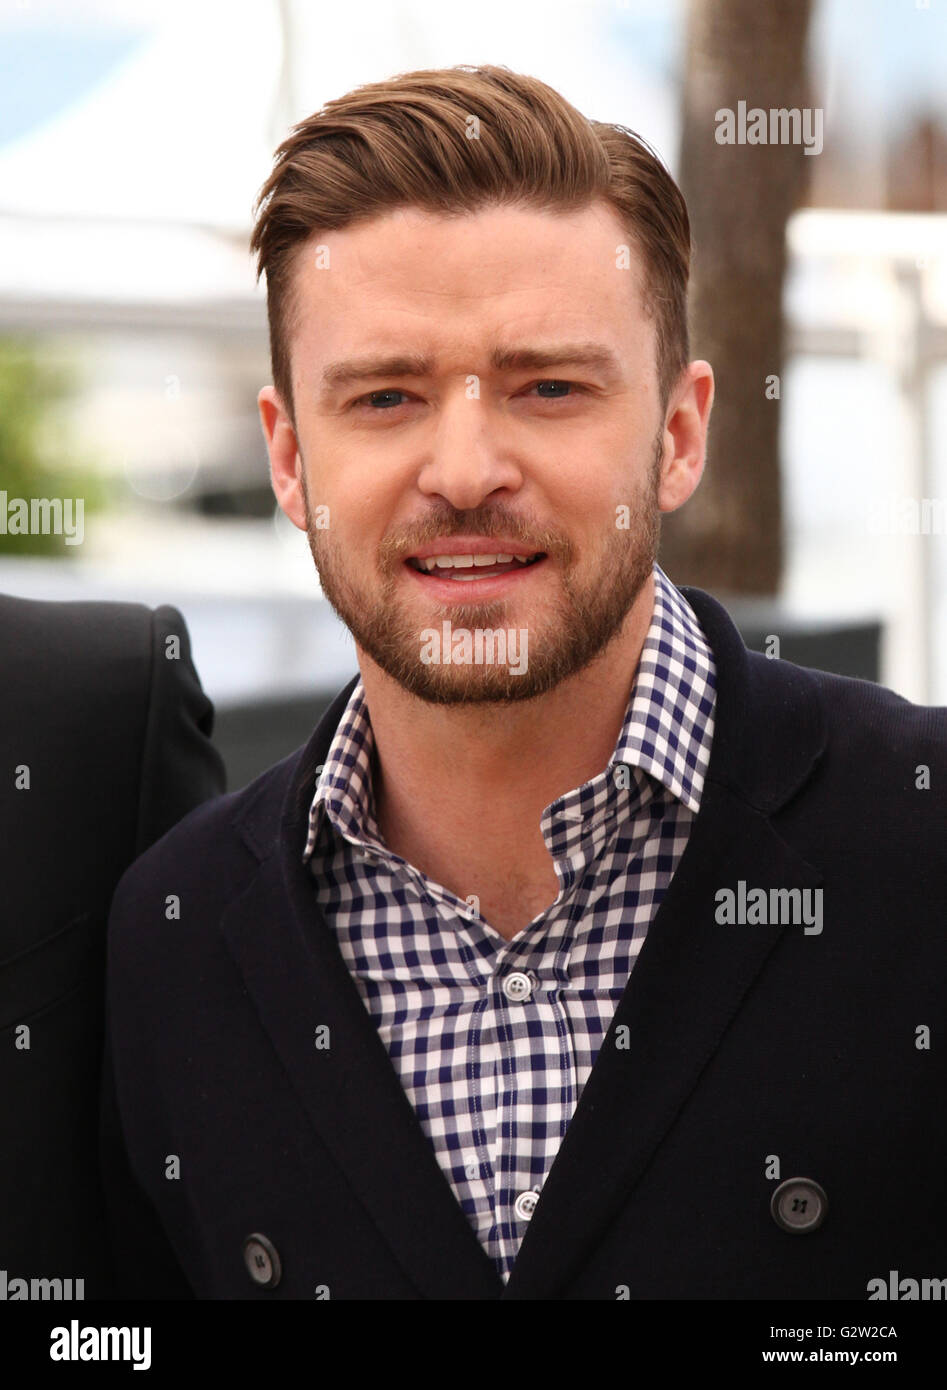 Justin Timberlake attends a photocall at the Cannes film festival on May 22, 2013 in Cannes Stock Photo